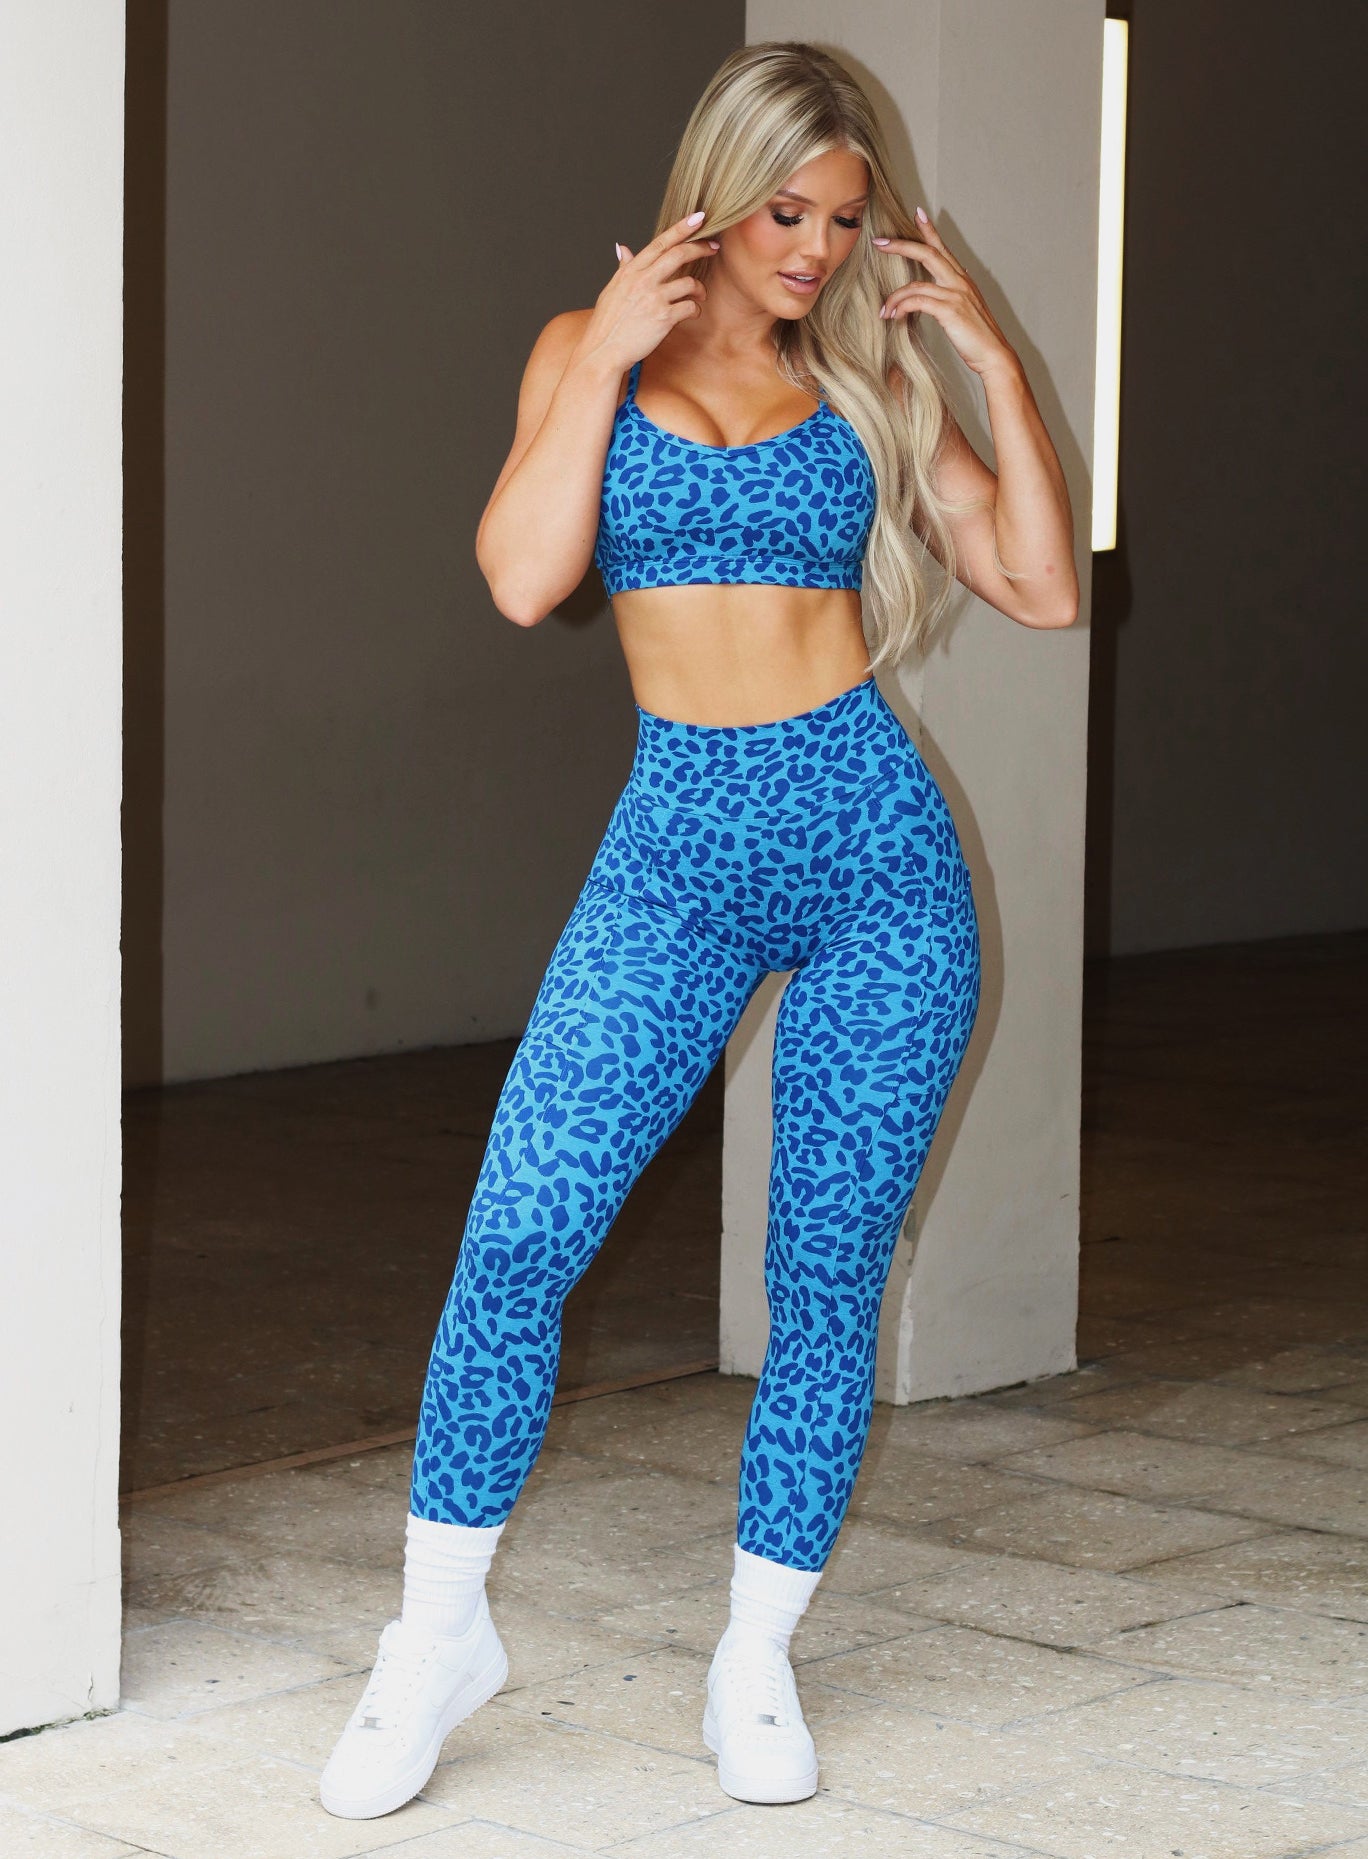 Front profile view of a model wearing our curves leggings in blue cheetah color and a matching bra